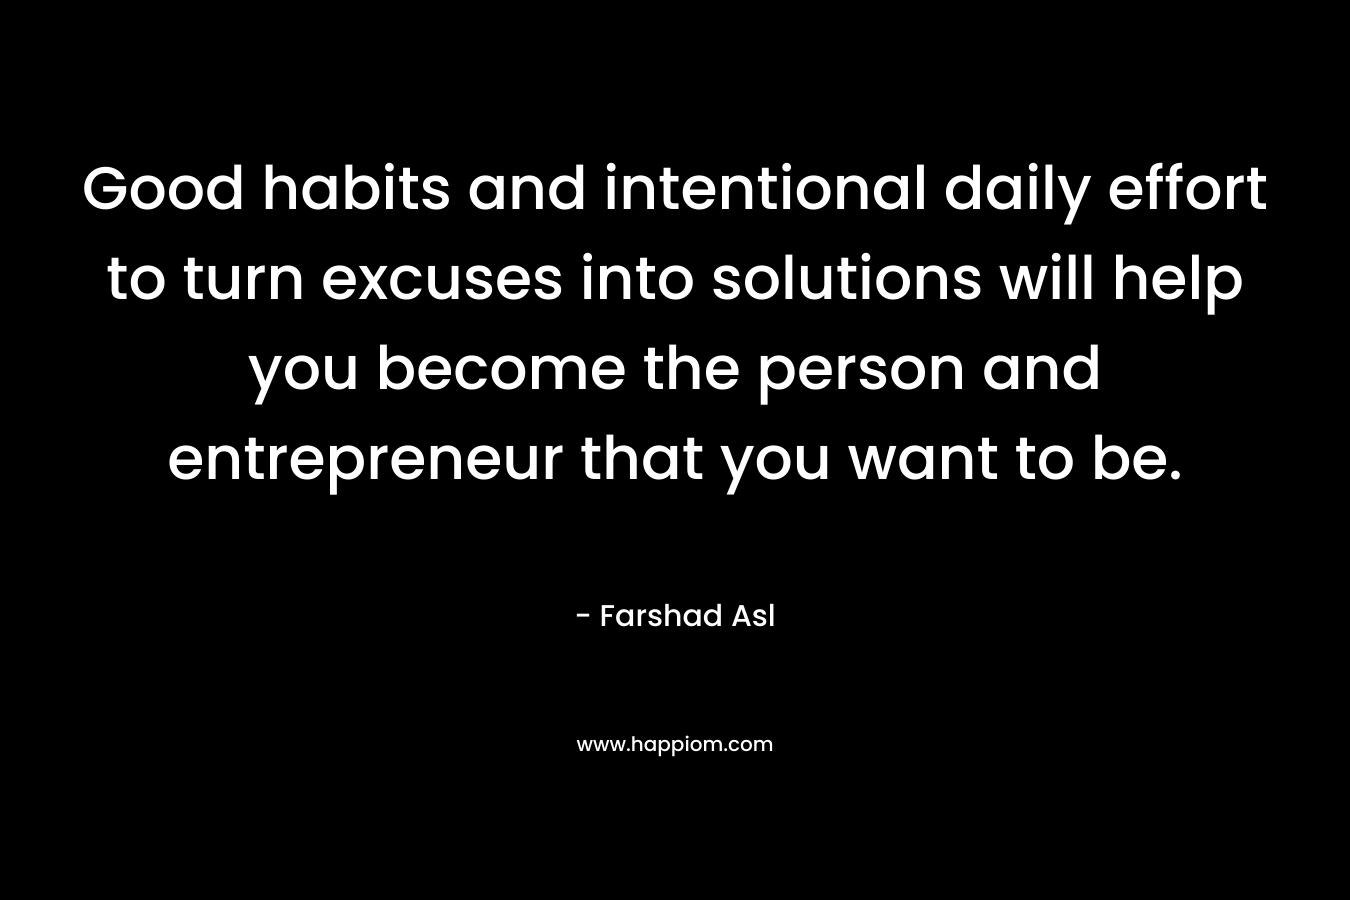 Good habits and intentional daily effort to turn excuses into solutions will help you become the person and entrepreneur that you want to be. – Farshad Asl